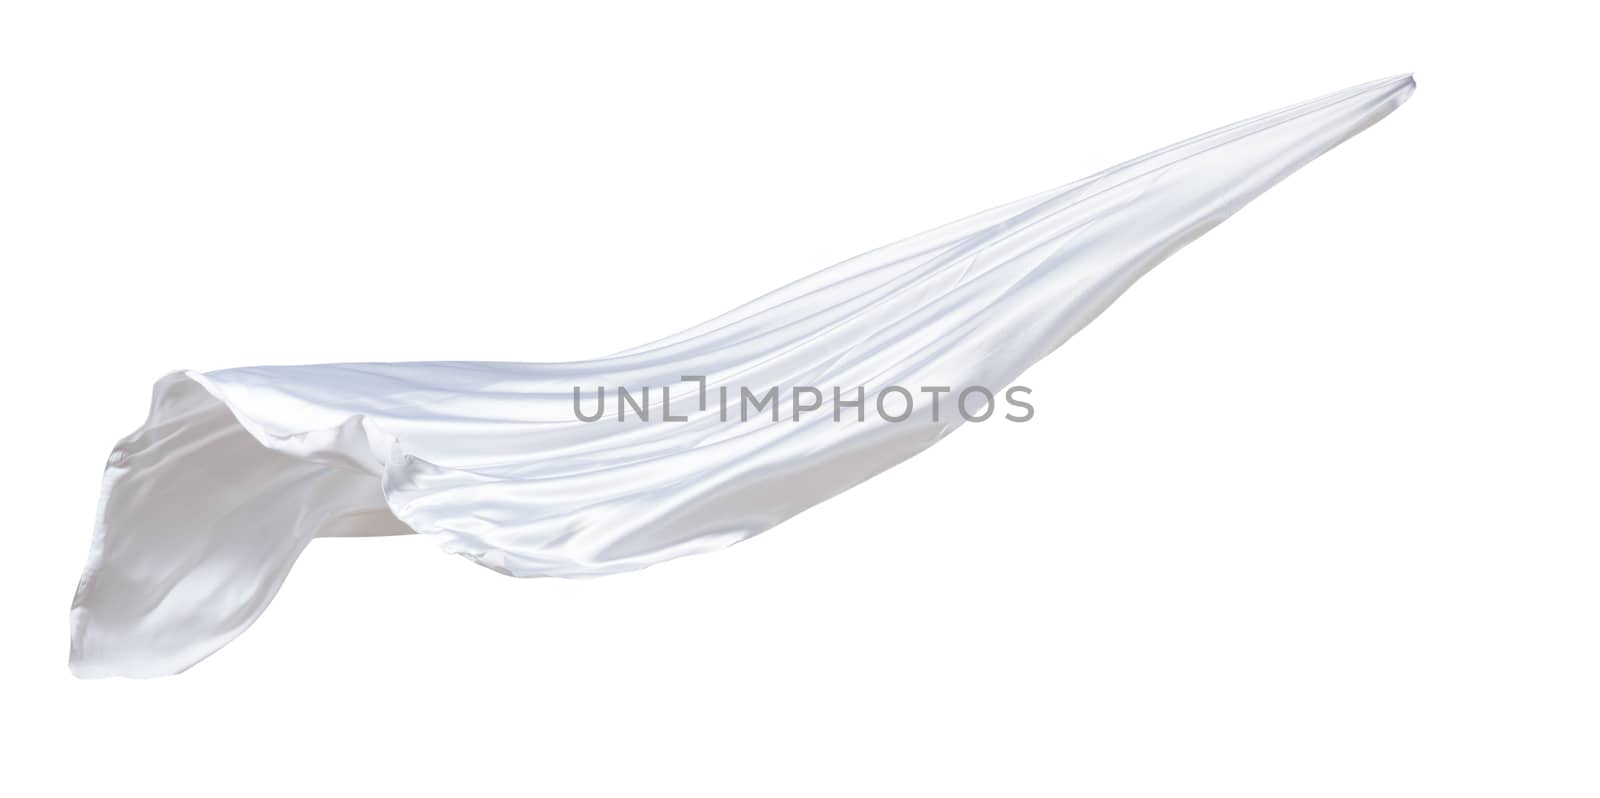 fabric weaves the wind, isolated on white background